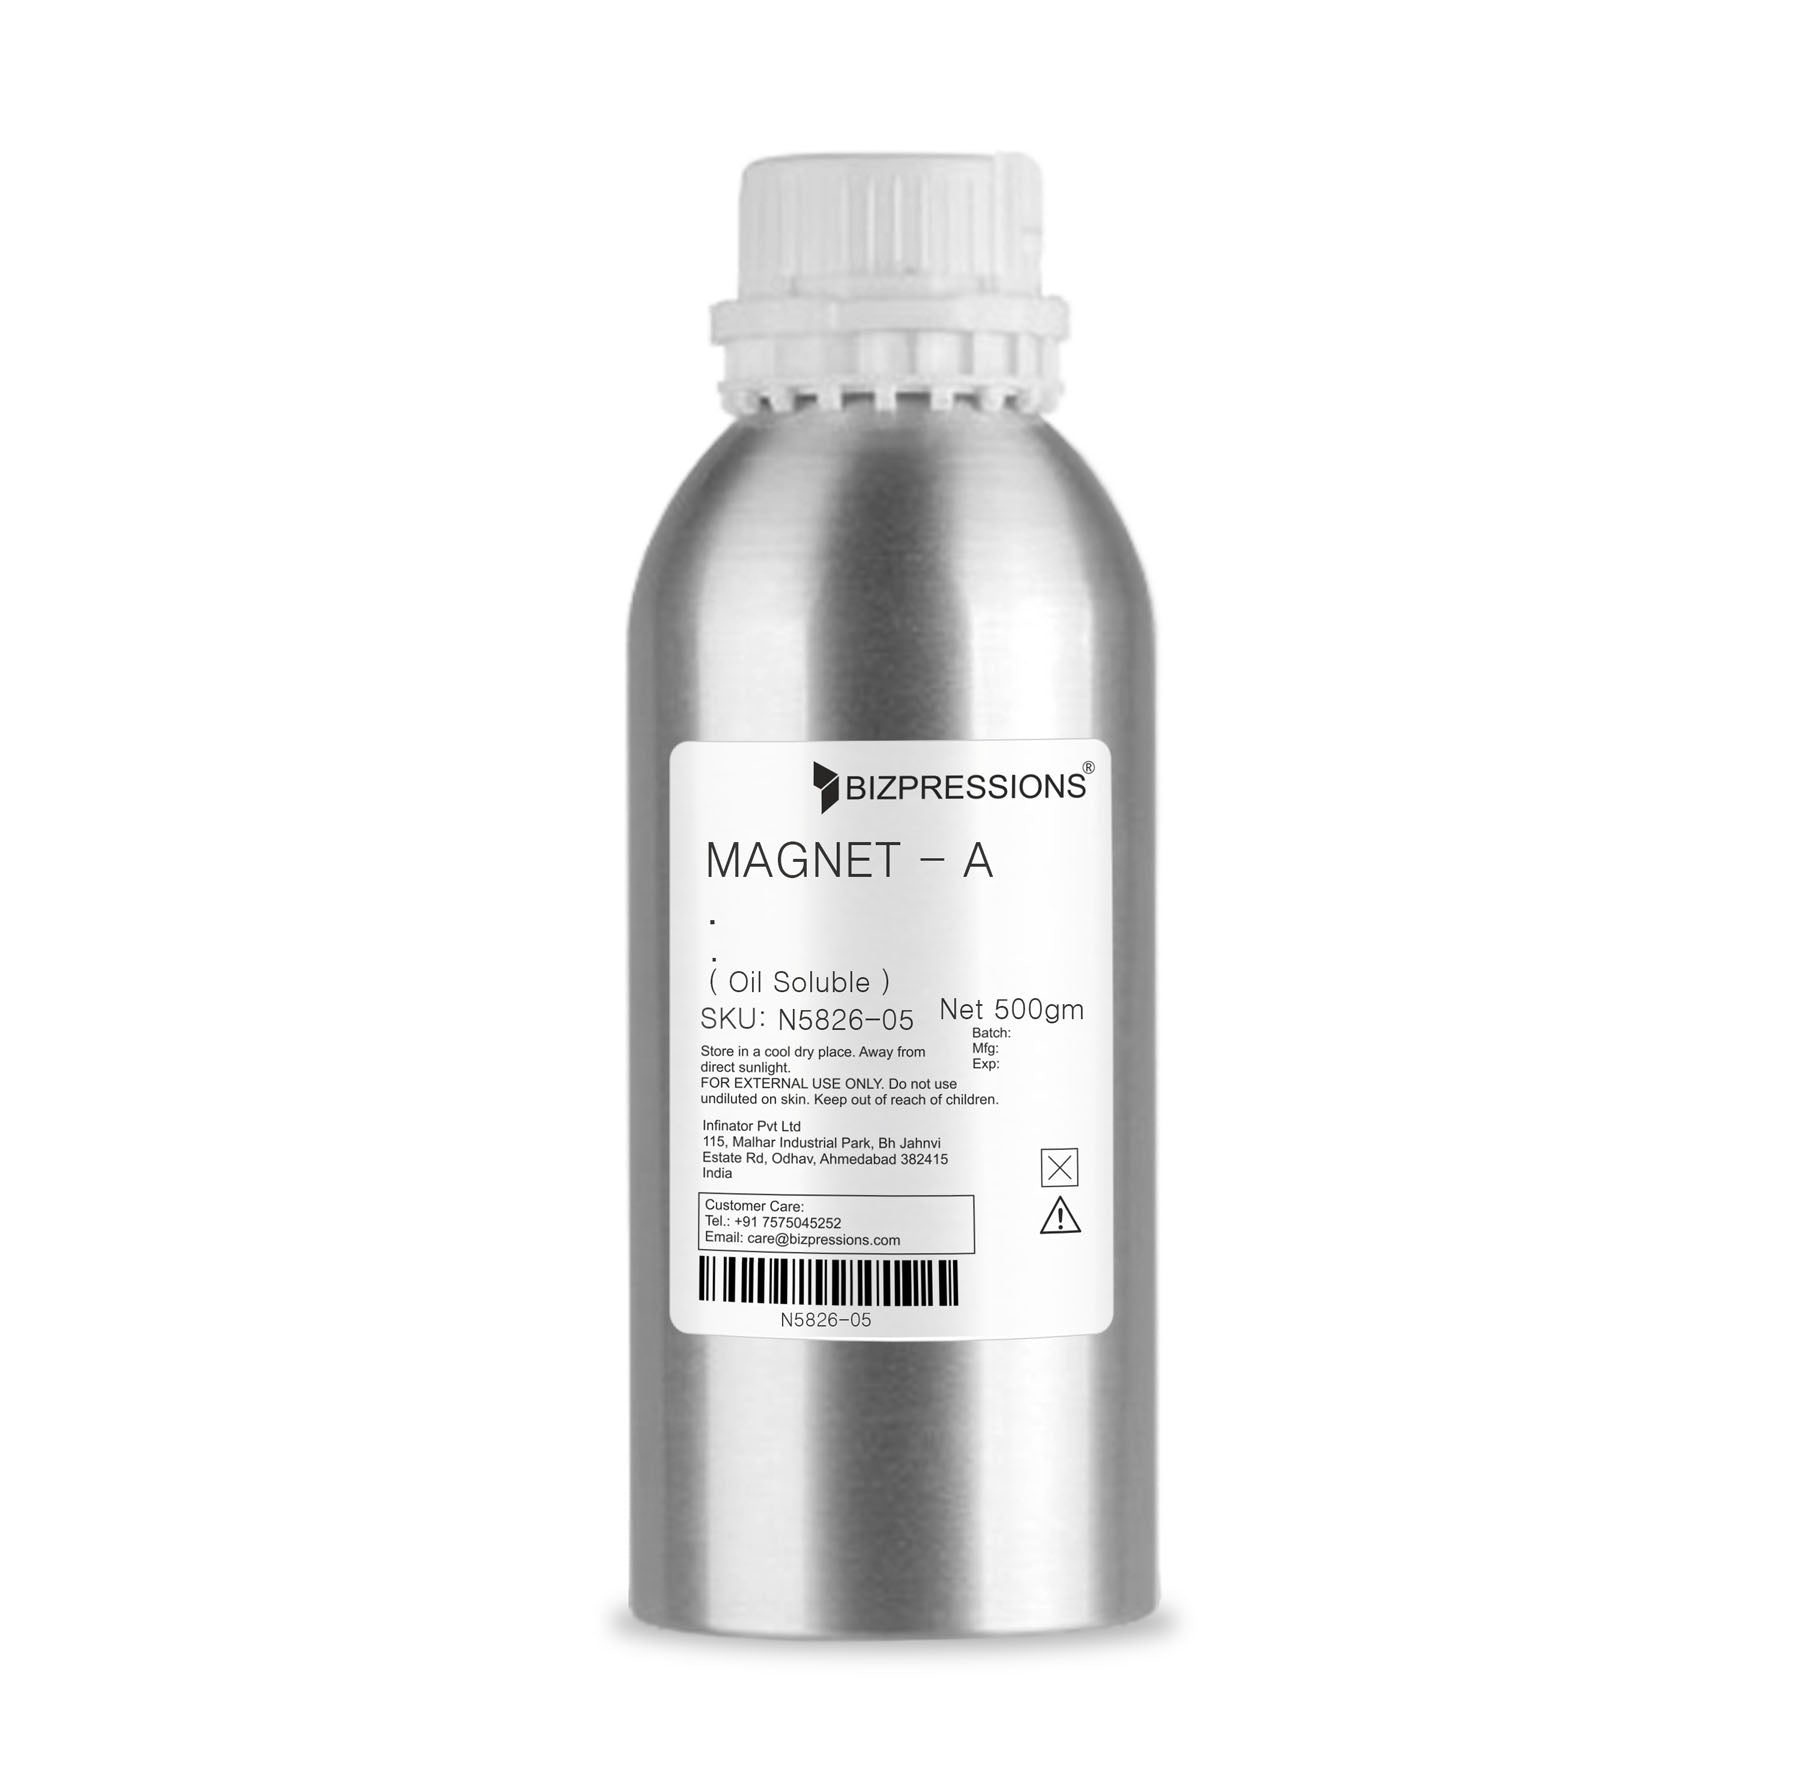 MAGNET - A - Fragrance ( Oil Soluble ) - 500 gm